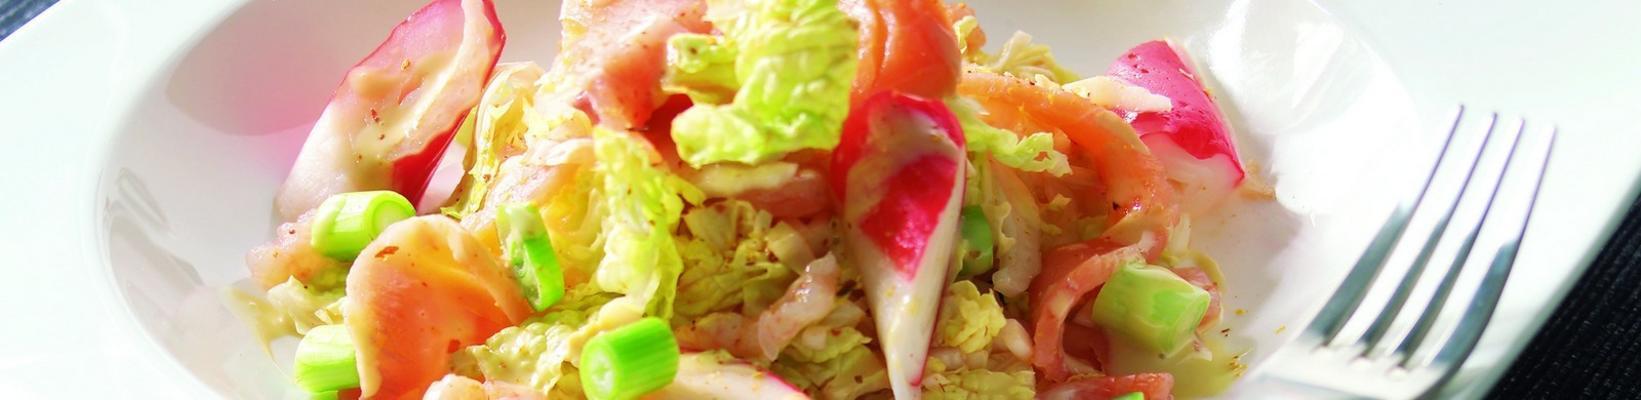 Chinese coleslaw with salmon and shrimps